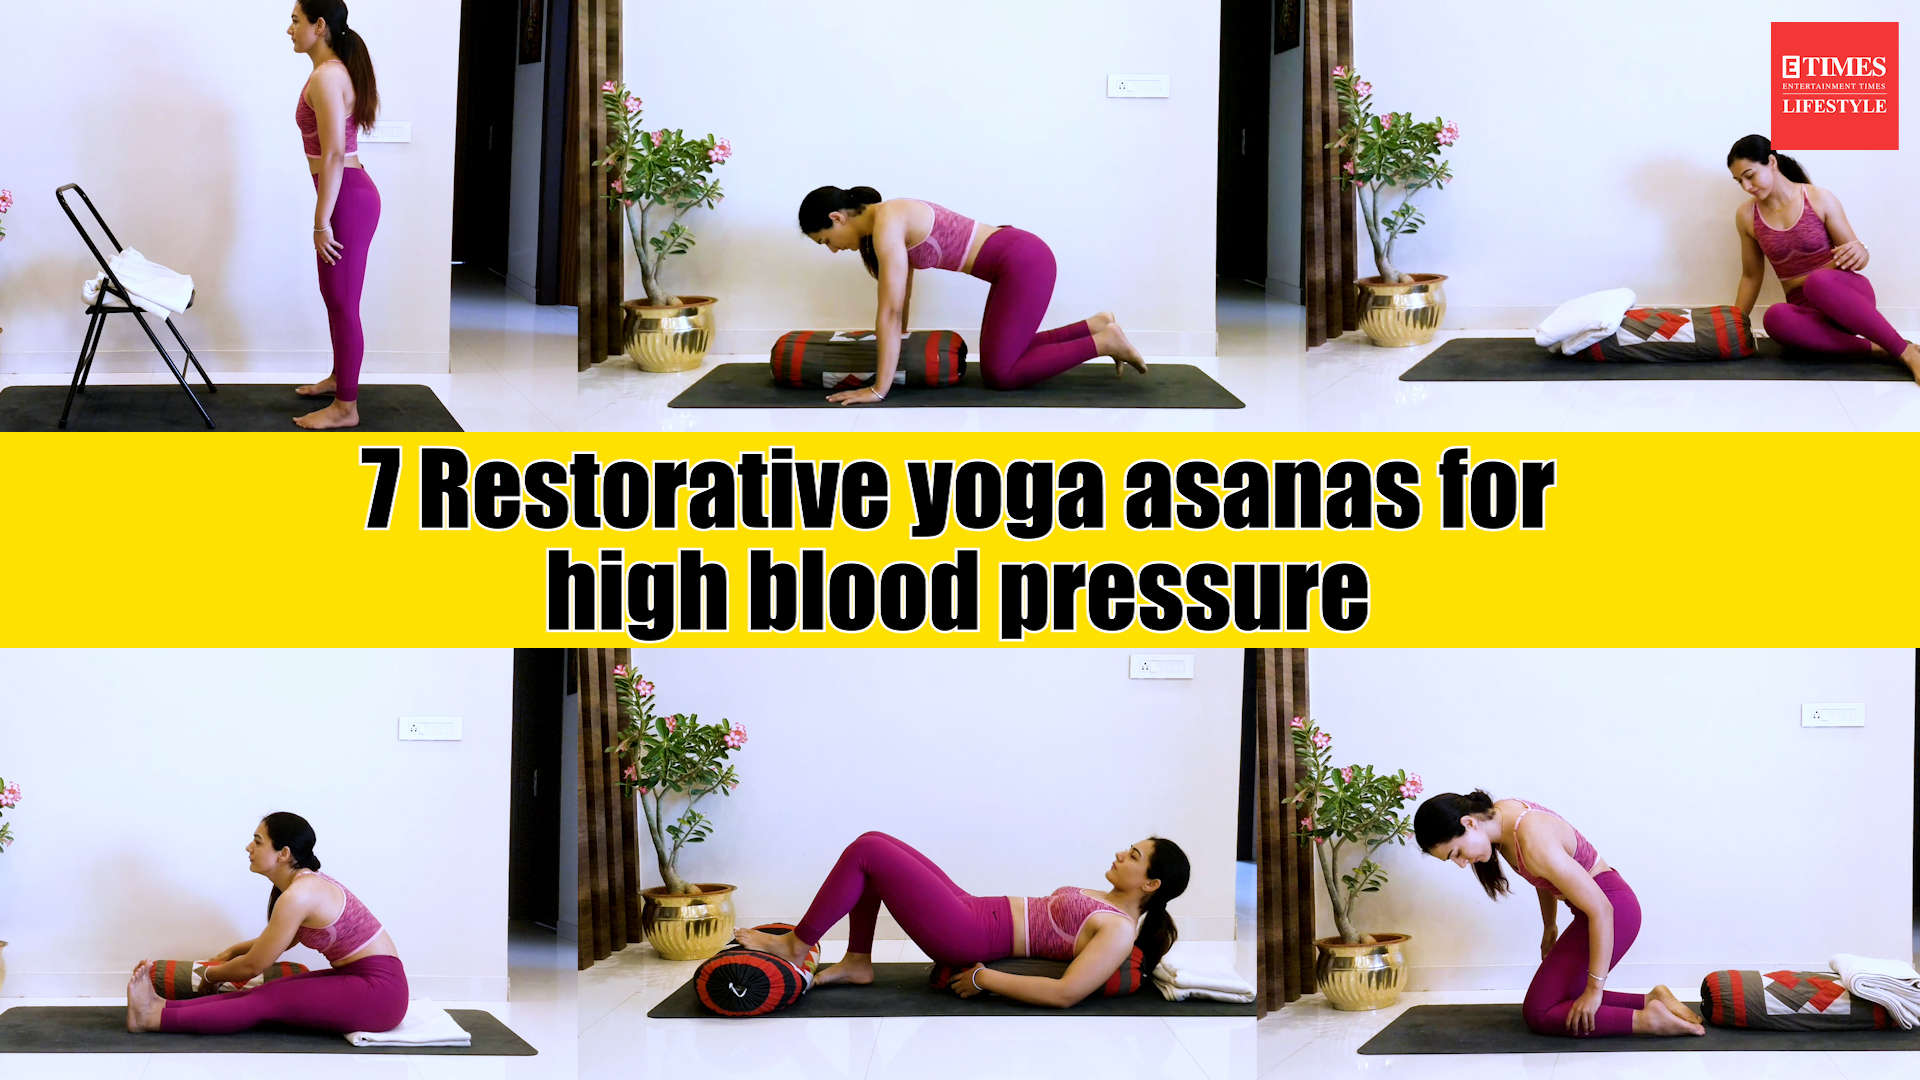 3 yoga poses to take care of low blood pressure